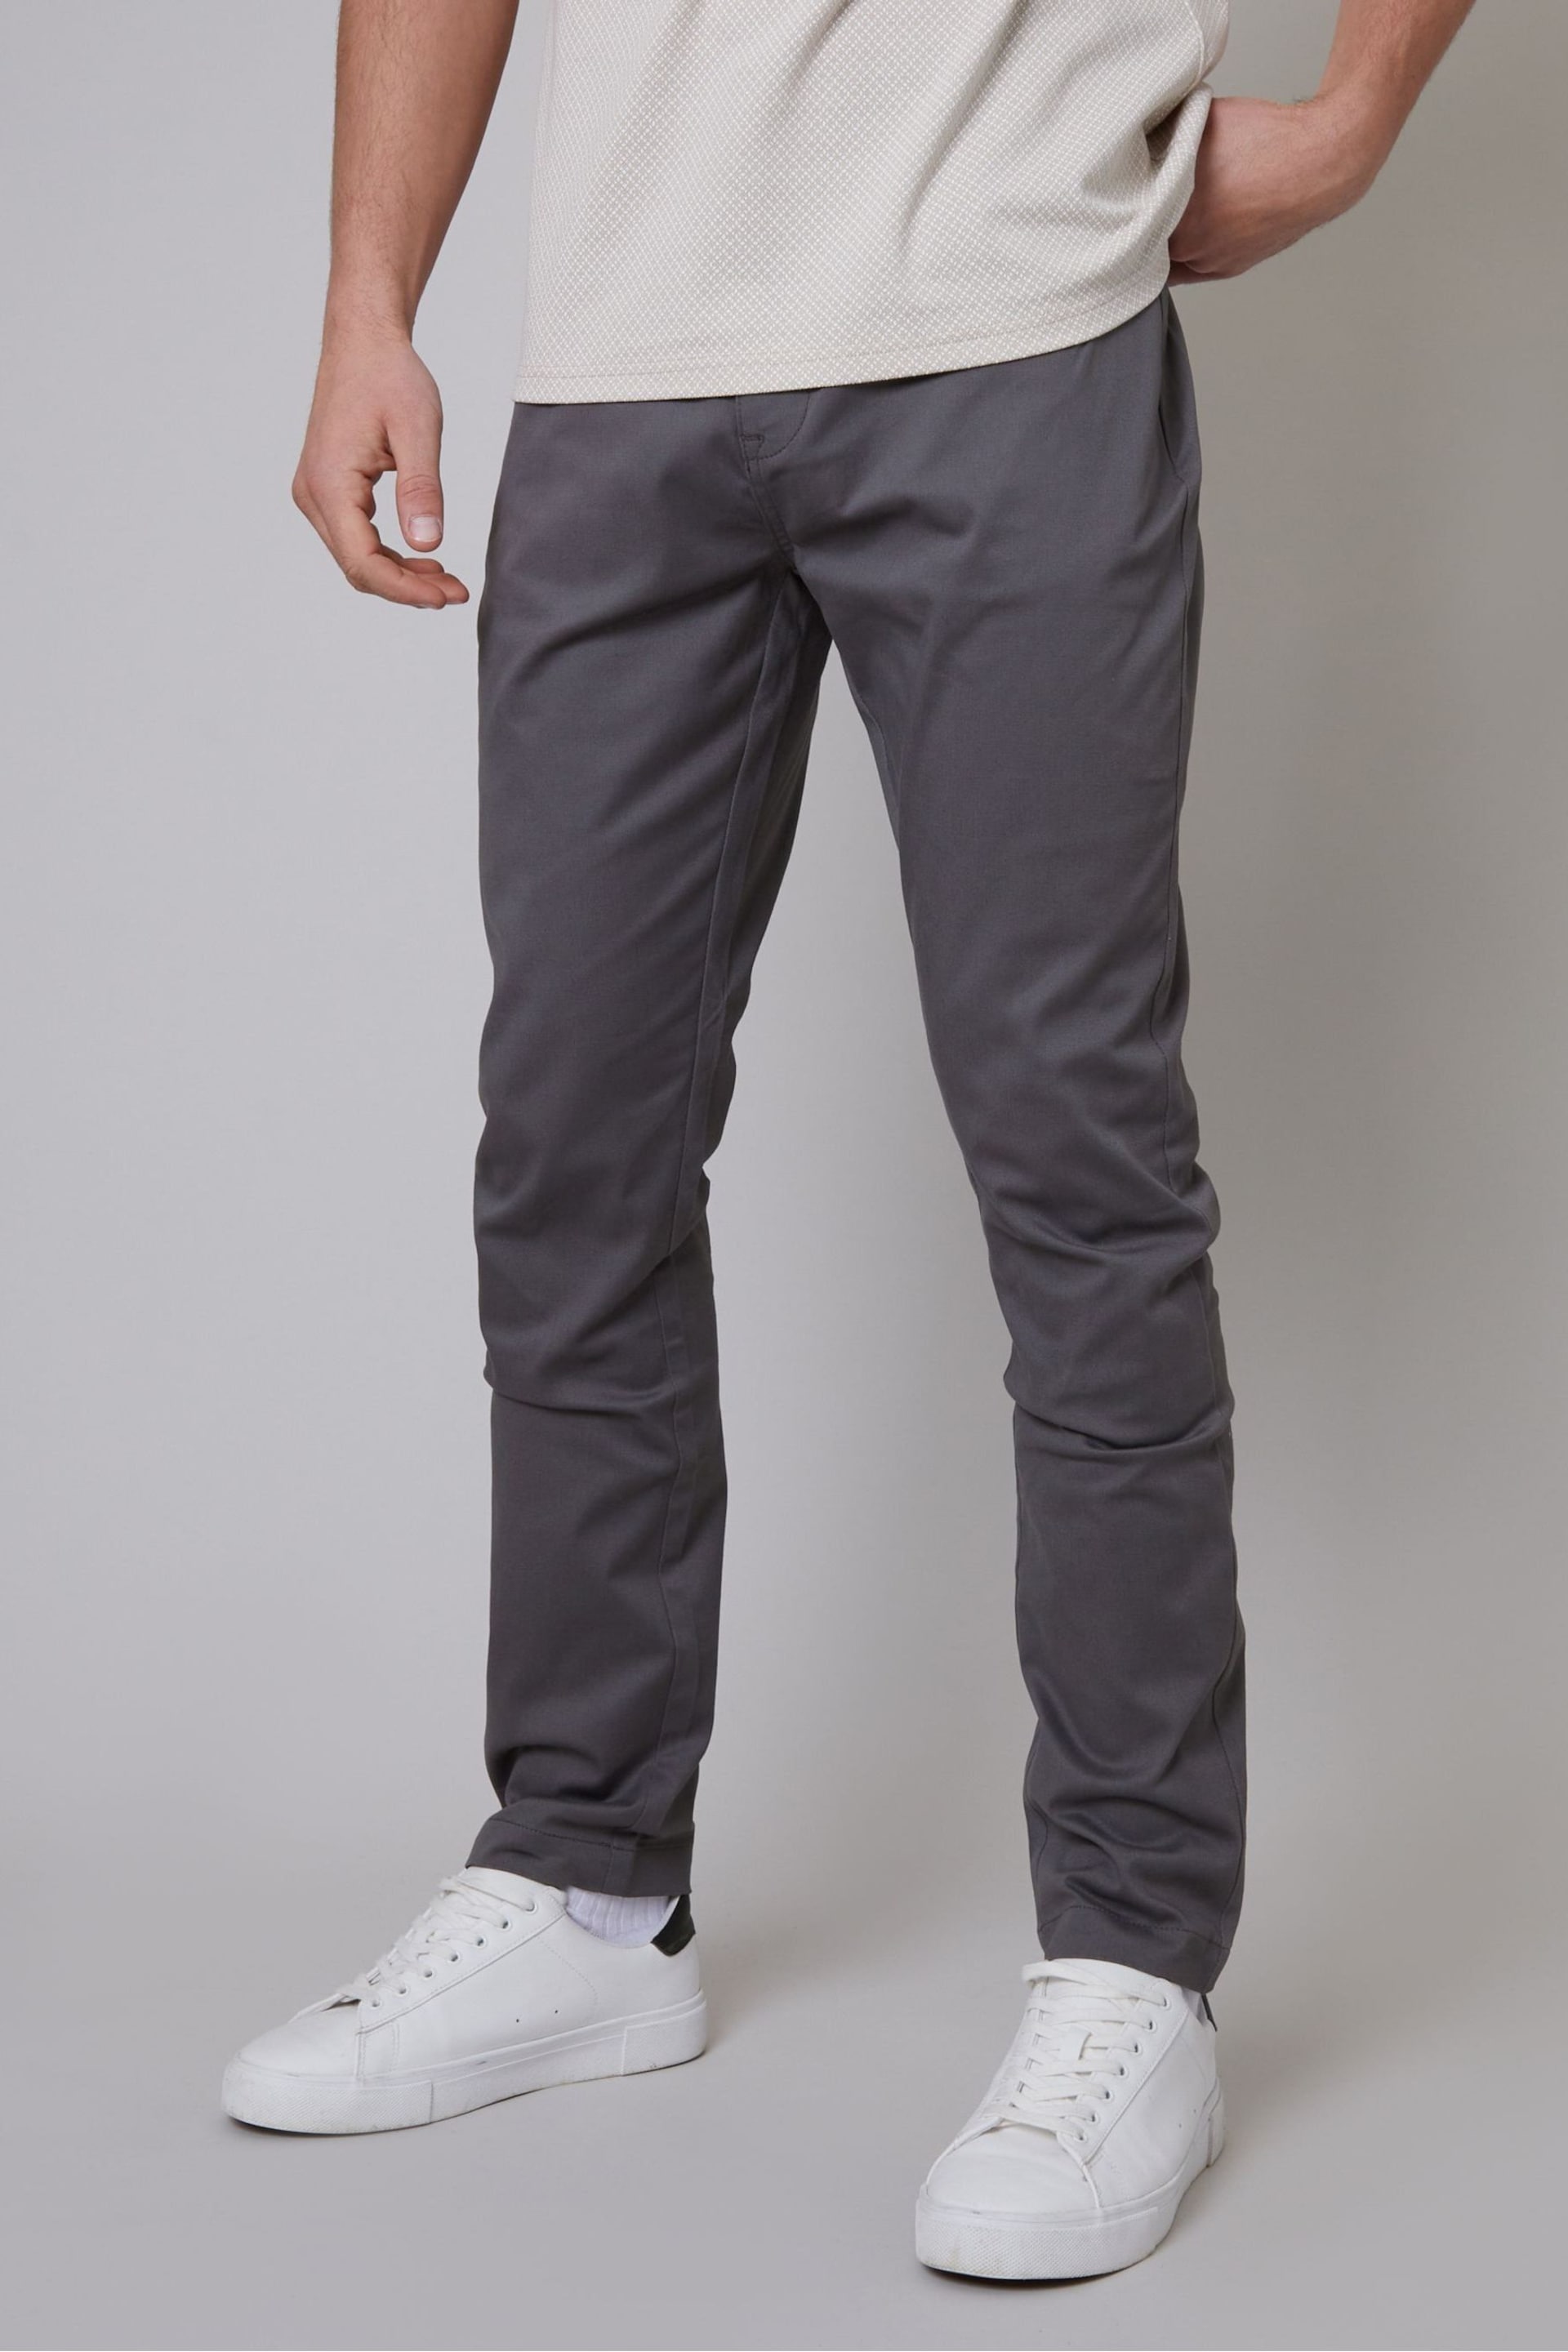 Threadbare Grey Cotton Slim Fit 5 Pocket Chino Trousers With Stretch - Image 1 of 4